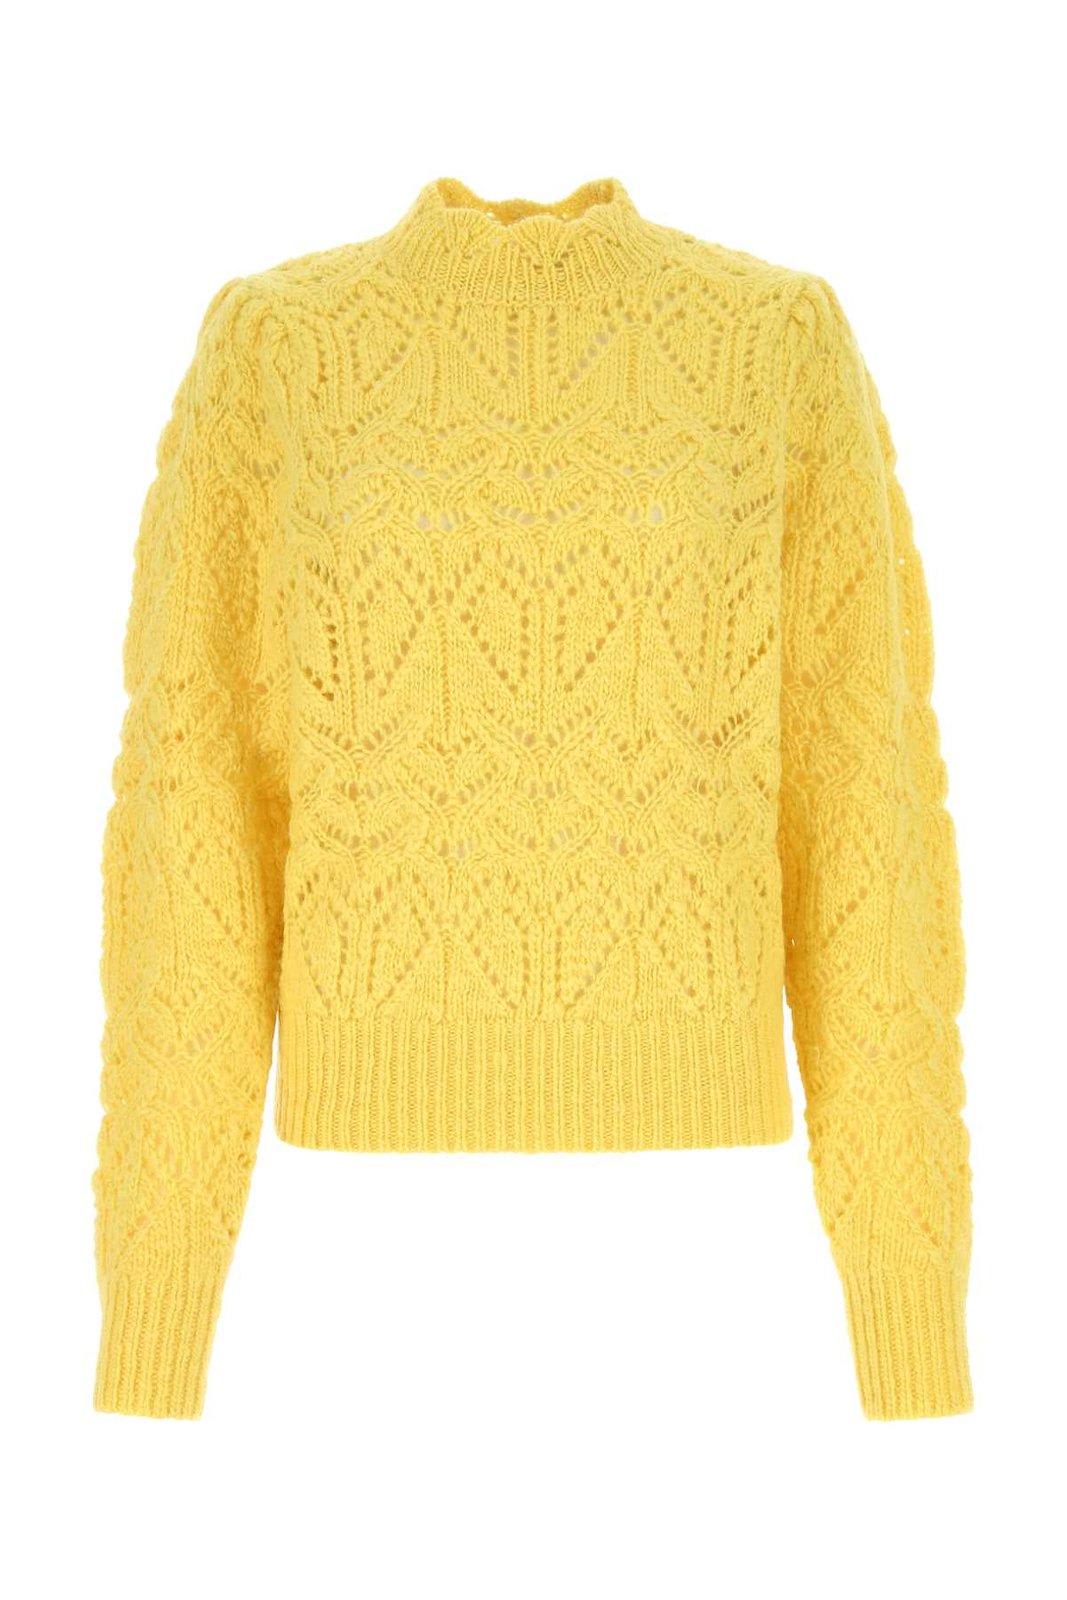 Isabel Marant Étoile Cable-knitted Sweater